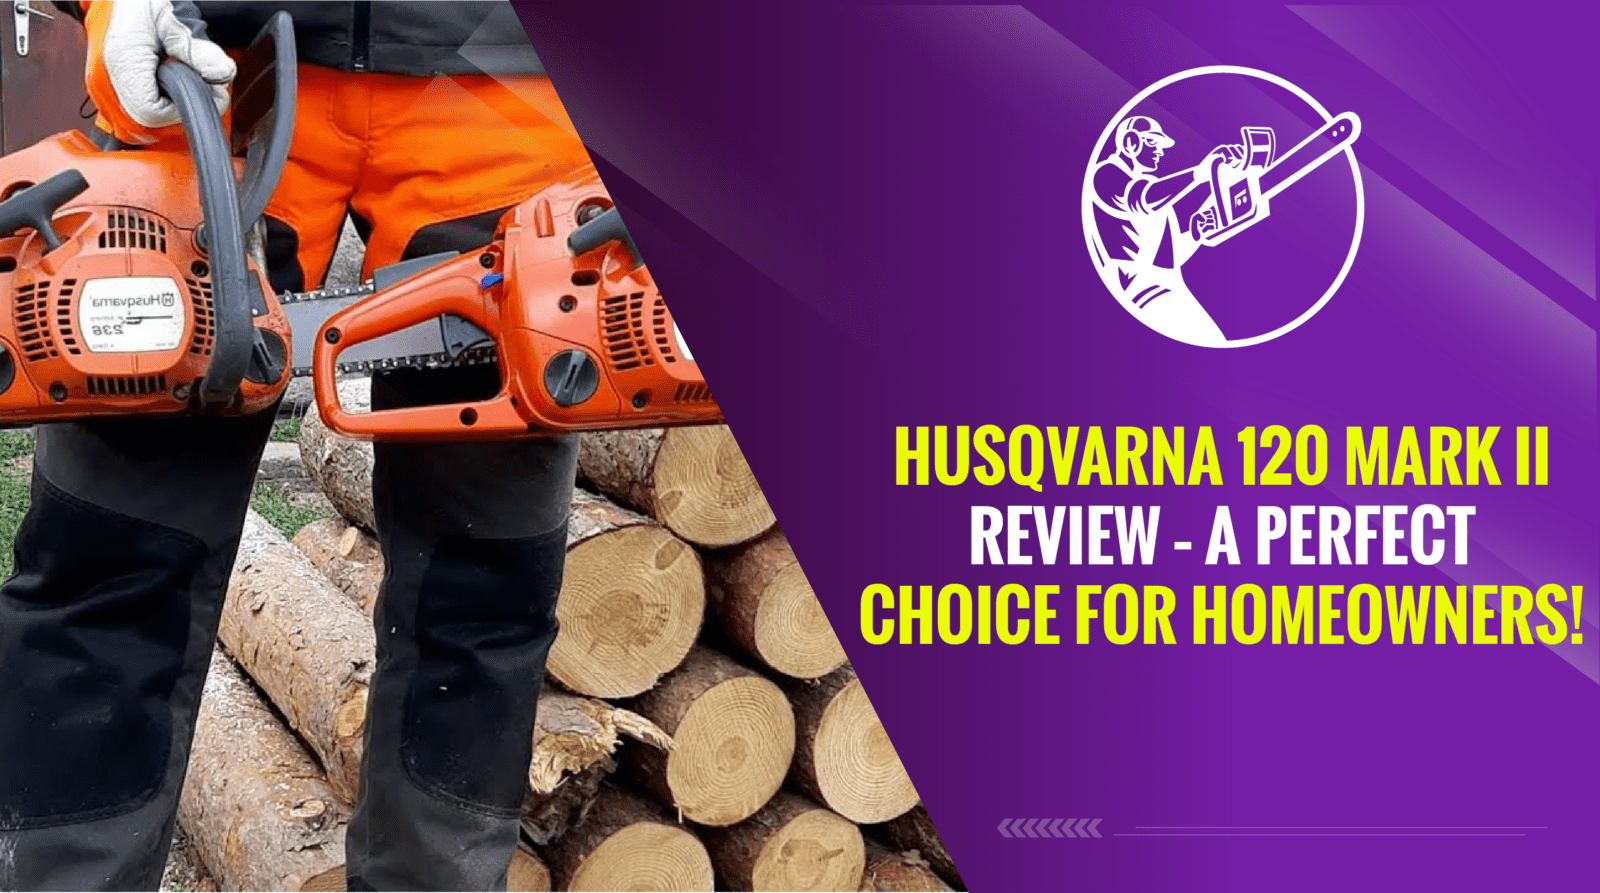 Husqvarna 120 Mark ii Review – A Perfect Choice for Homeowners!